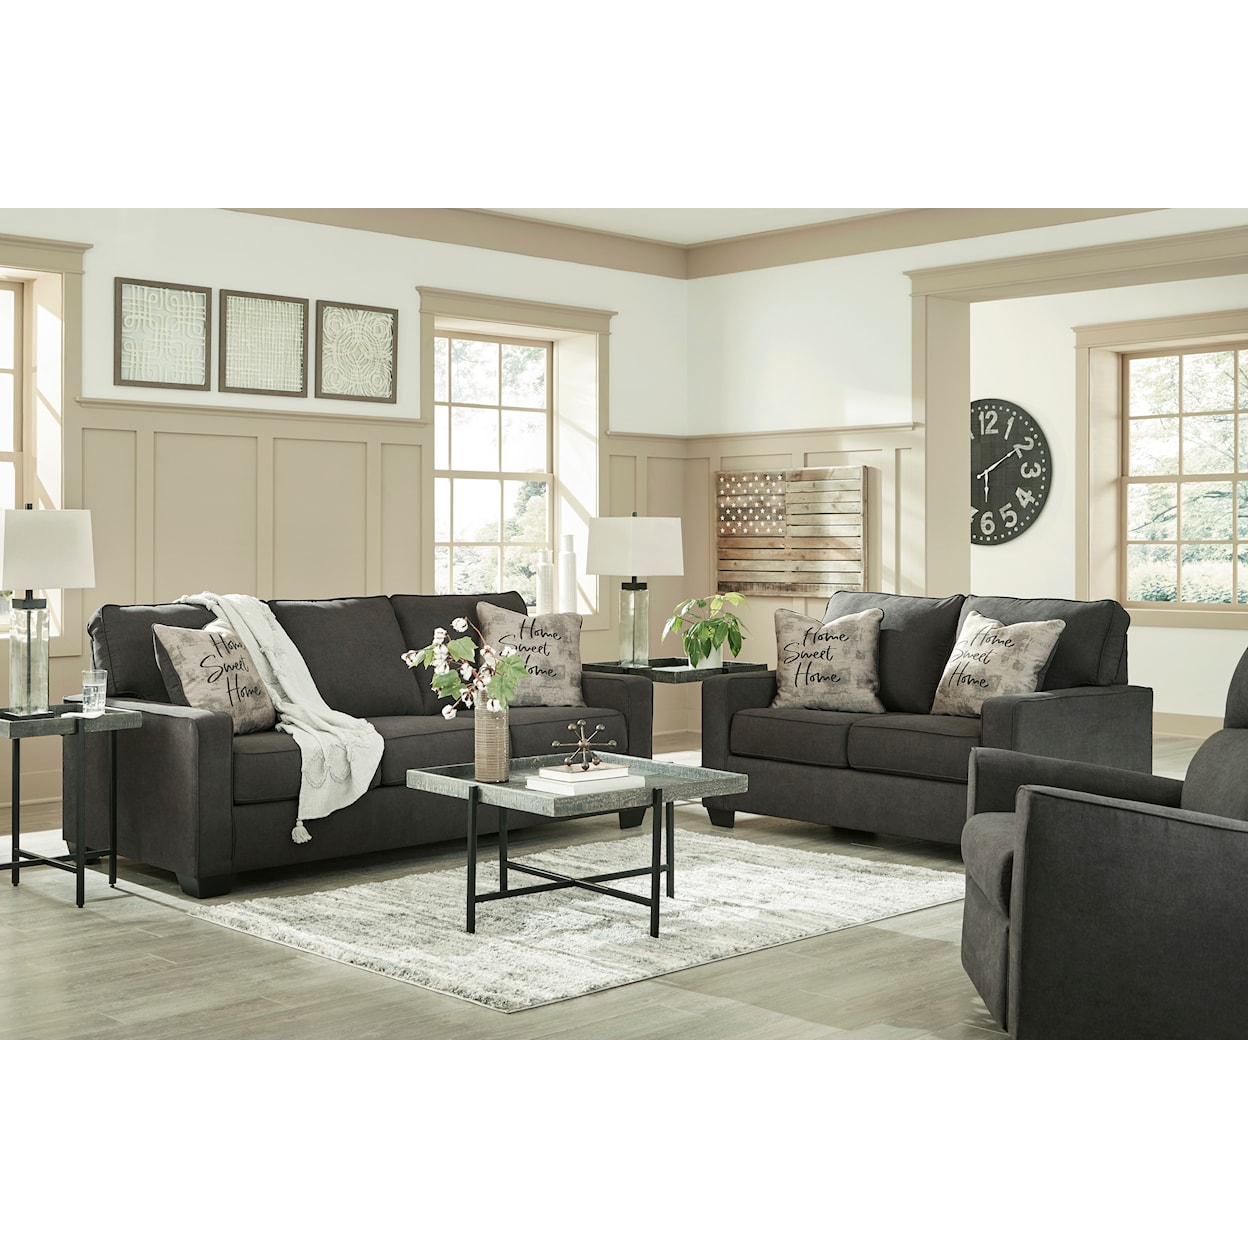 Signature Design by Ashley Furniture Lucina Queen Sofa Sleeper